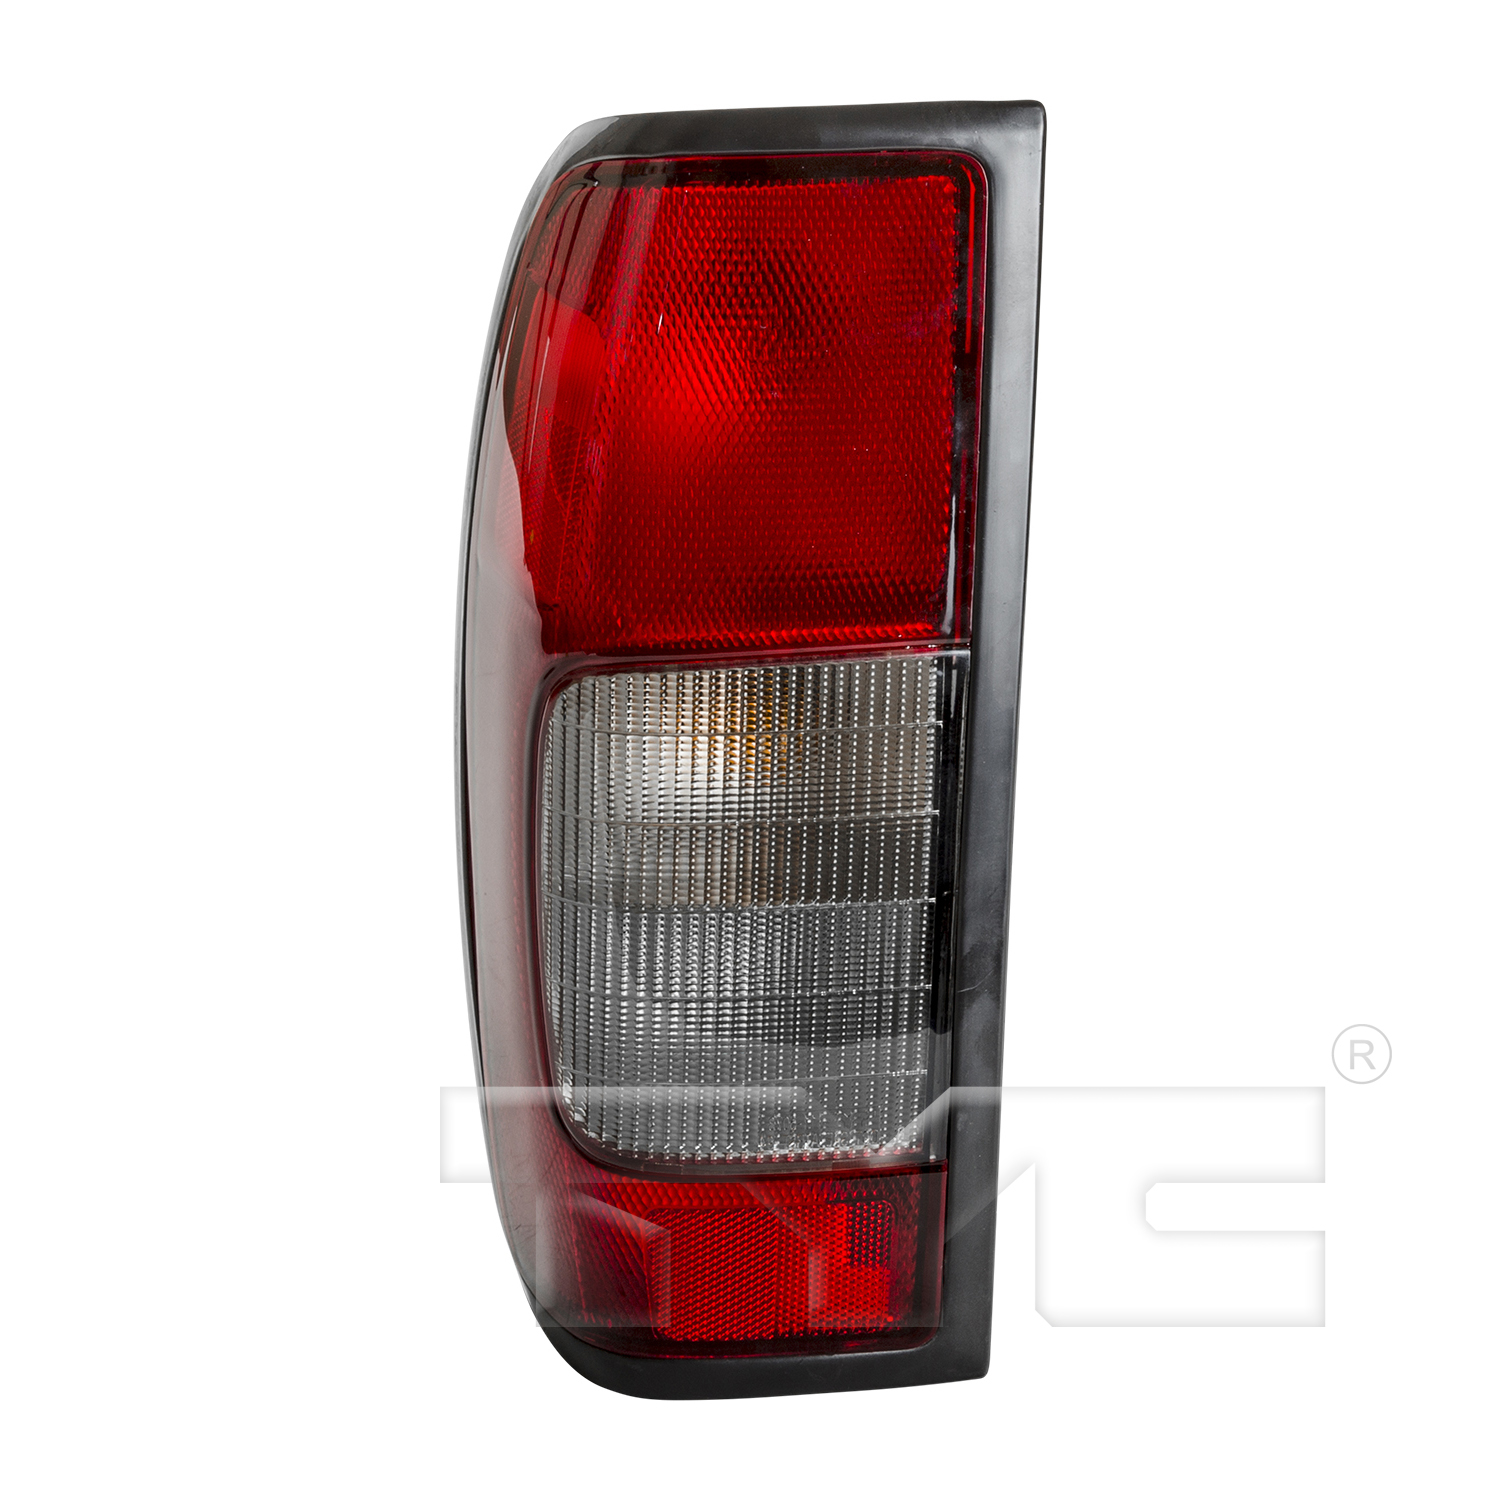 Aftermarket TAILLIGHTS for NISSAN - FRONTIER, FRONTIER,02-04,LT Taillamp assy